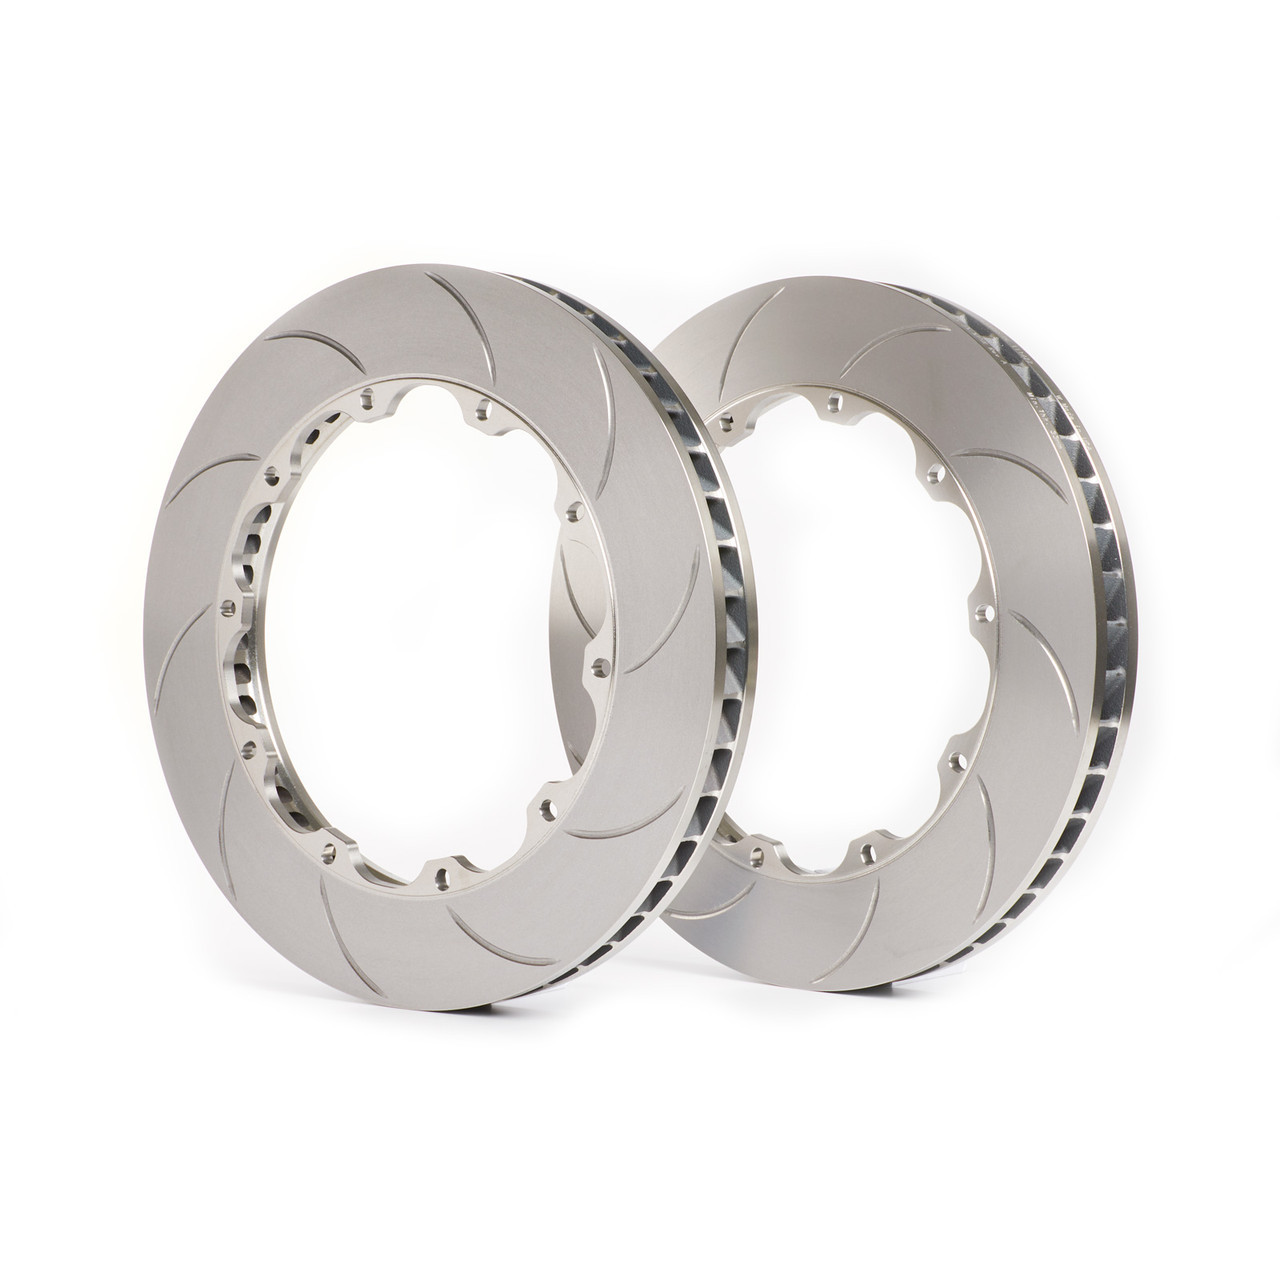 GiroDisc Replacement Front Rotor Rings for MK8 Golf R & 8Y S3 w/ GiroDisc Rotors 357x34mm